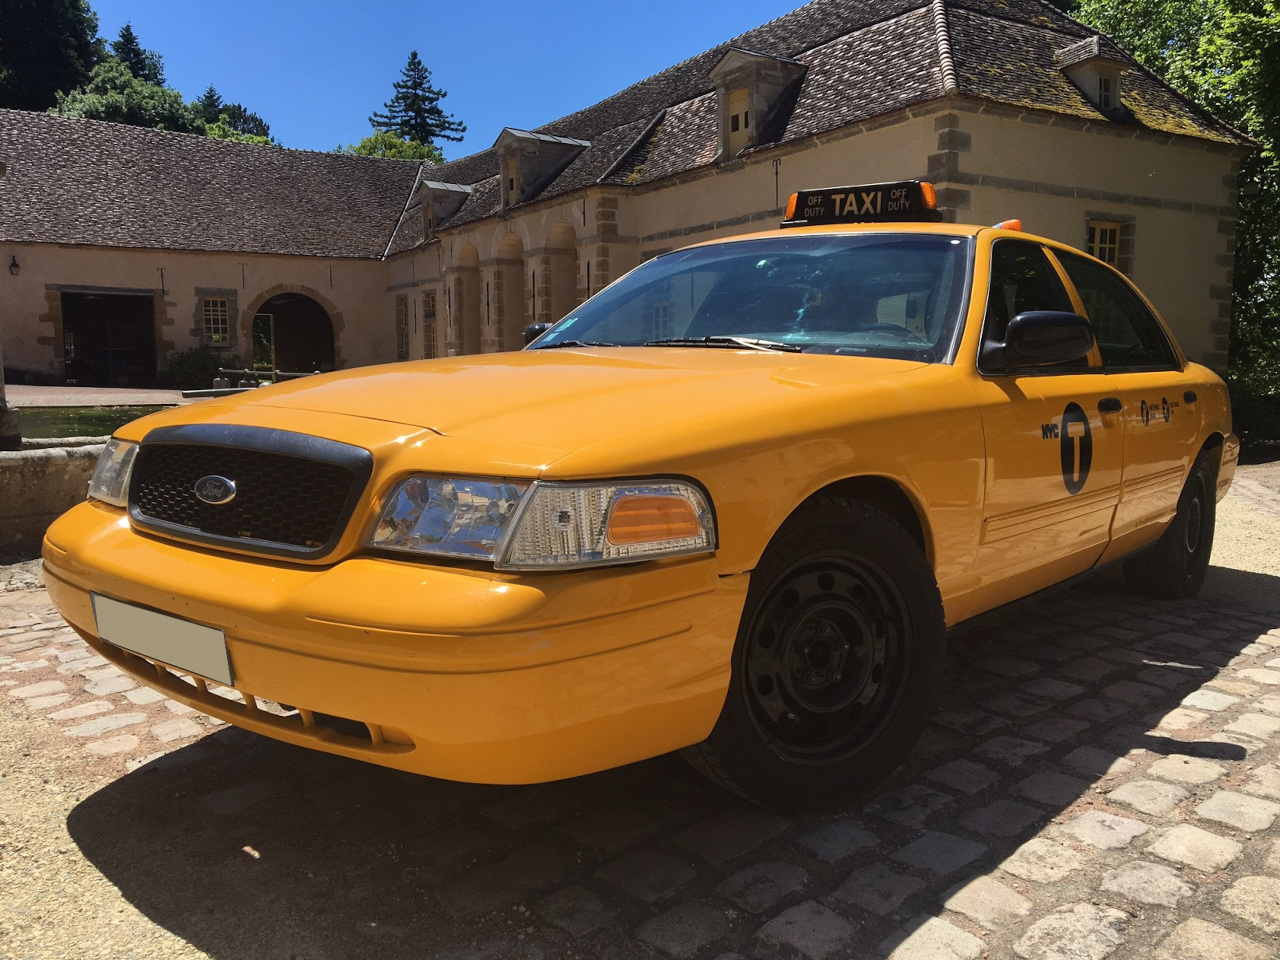 nos cabs a louer taxi new-yorkais crown victoria yellow cab devant chateau 